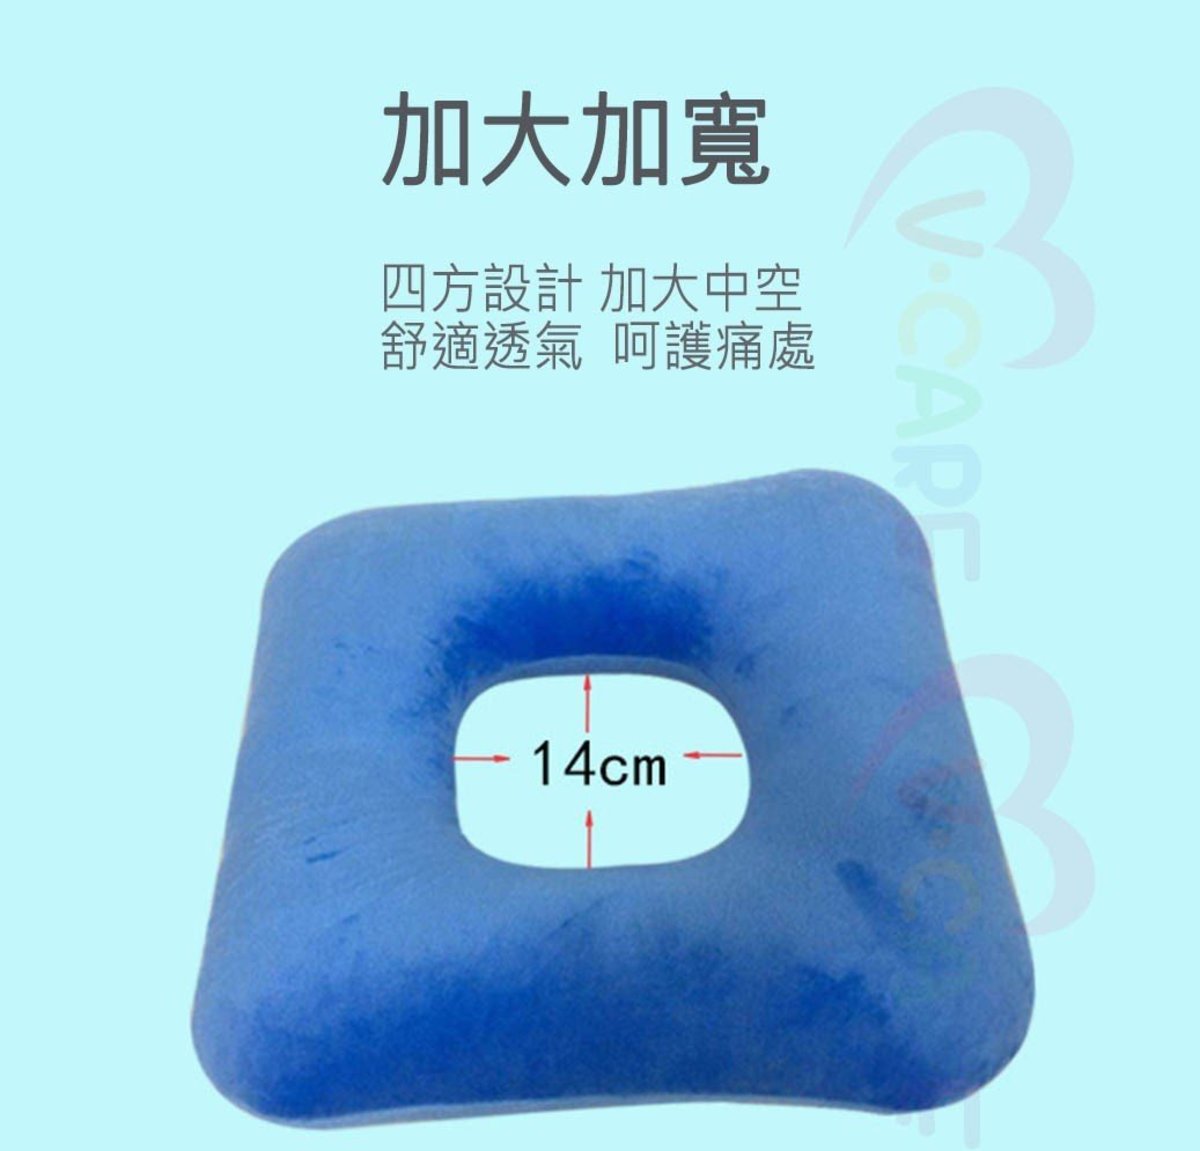 Inflatable Cushion Anti-Bedsore Medical Anti-Pressure Sore Washer for  Cushion Hemorrhoids for Elderly Patients Lying